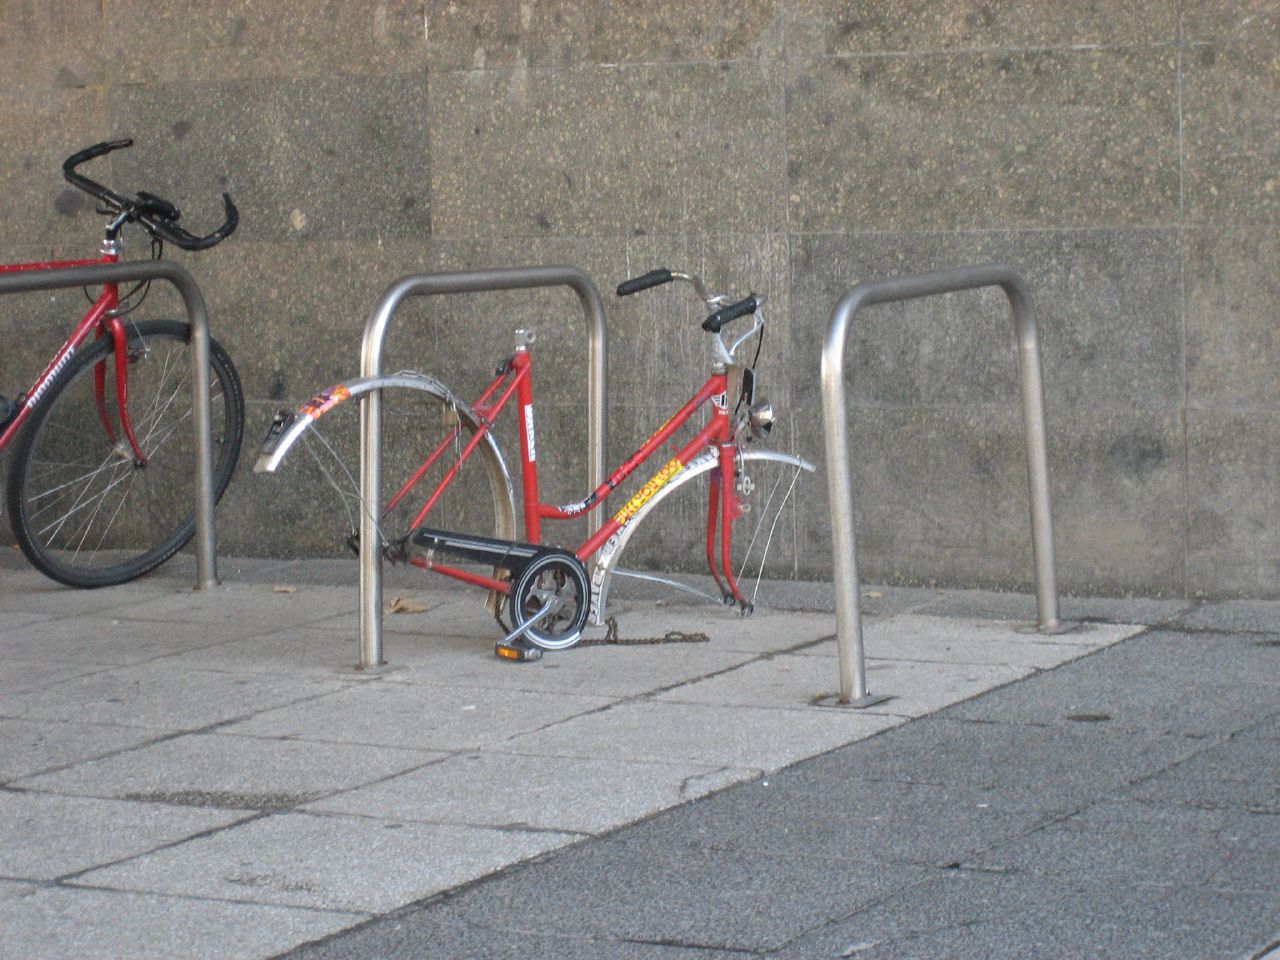 bicycles locked in front of barriers in a city